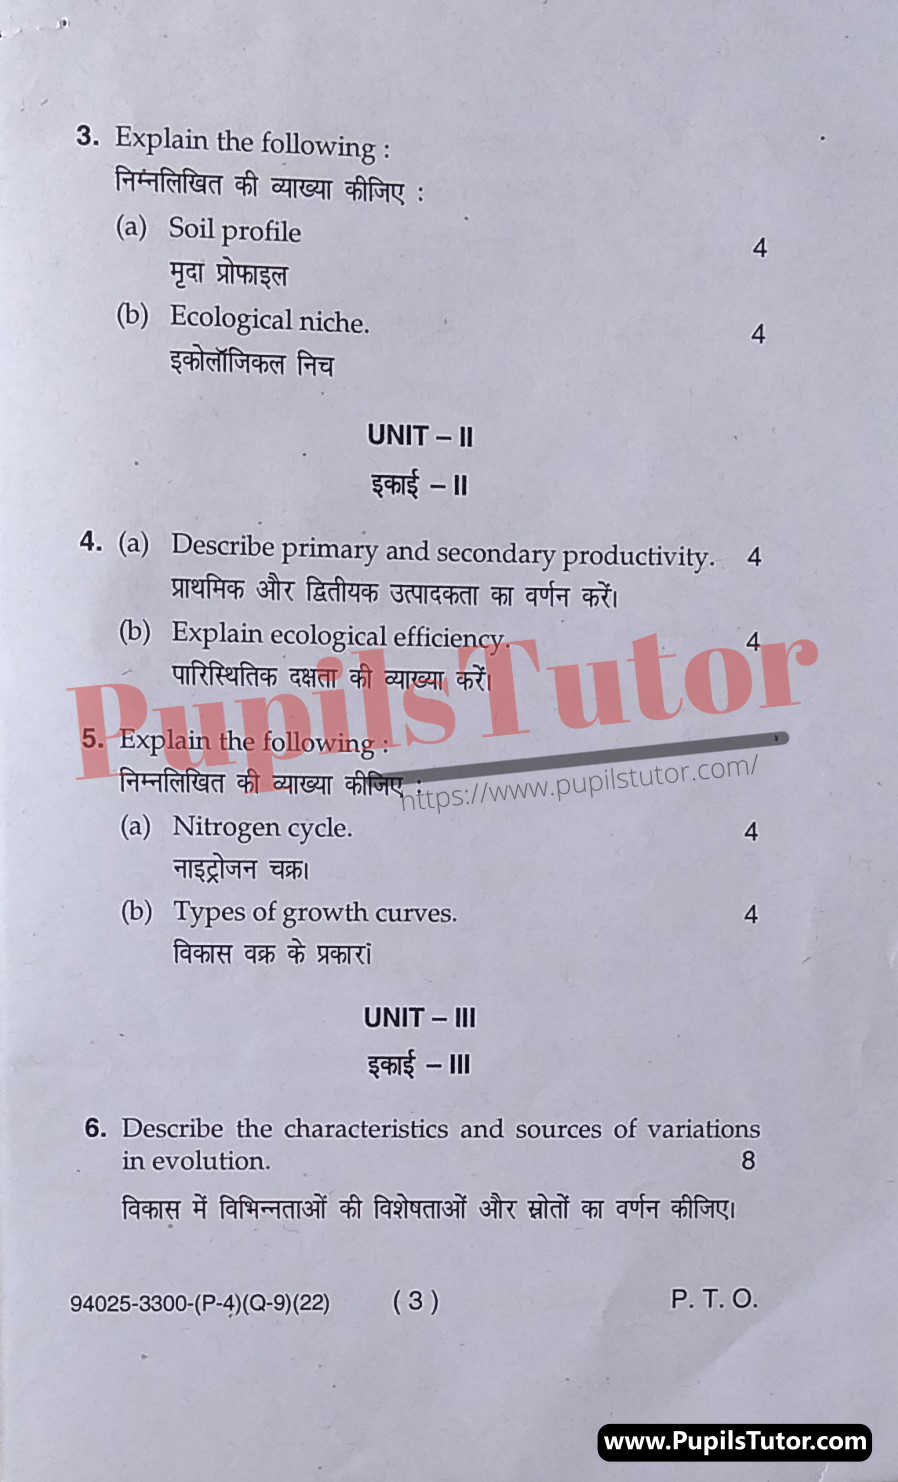 Free Download PDF Of M.D. University B.Sc. [Zoology] 5th Semester Latest Question Paper For Ecology And Evolution Subject (Page 3) - https://www.pupilstutor.com